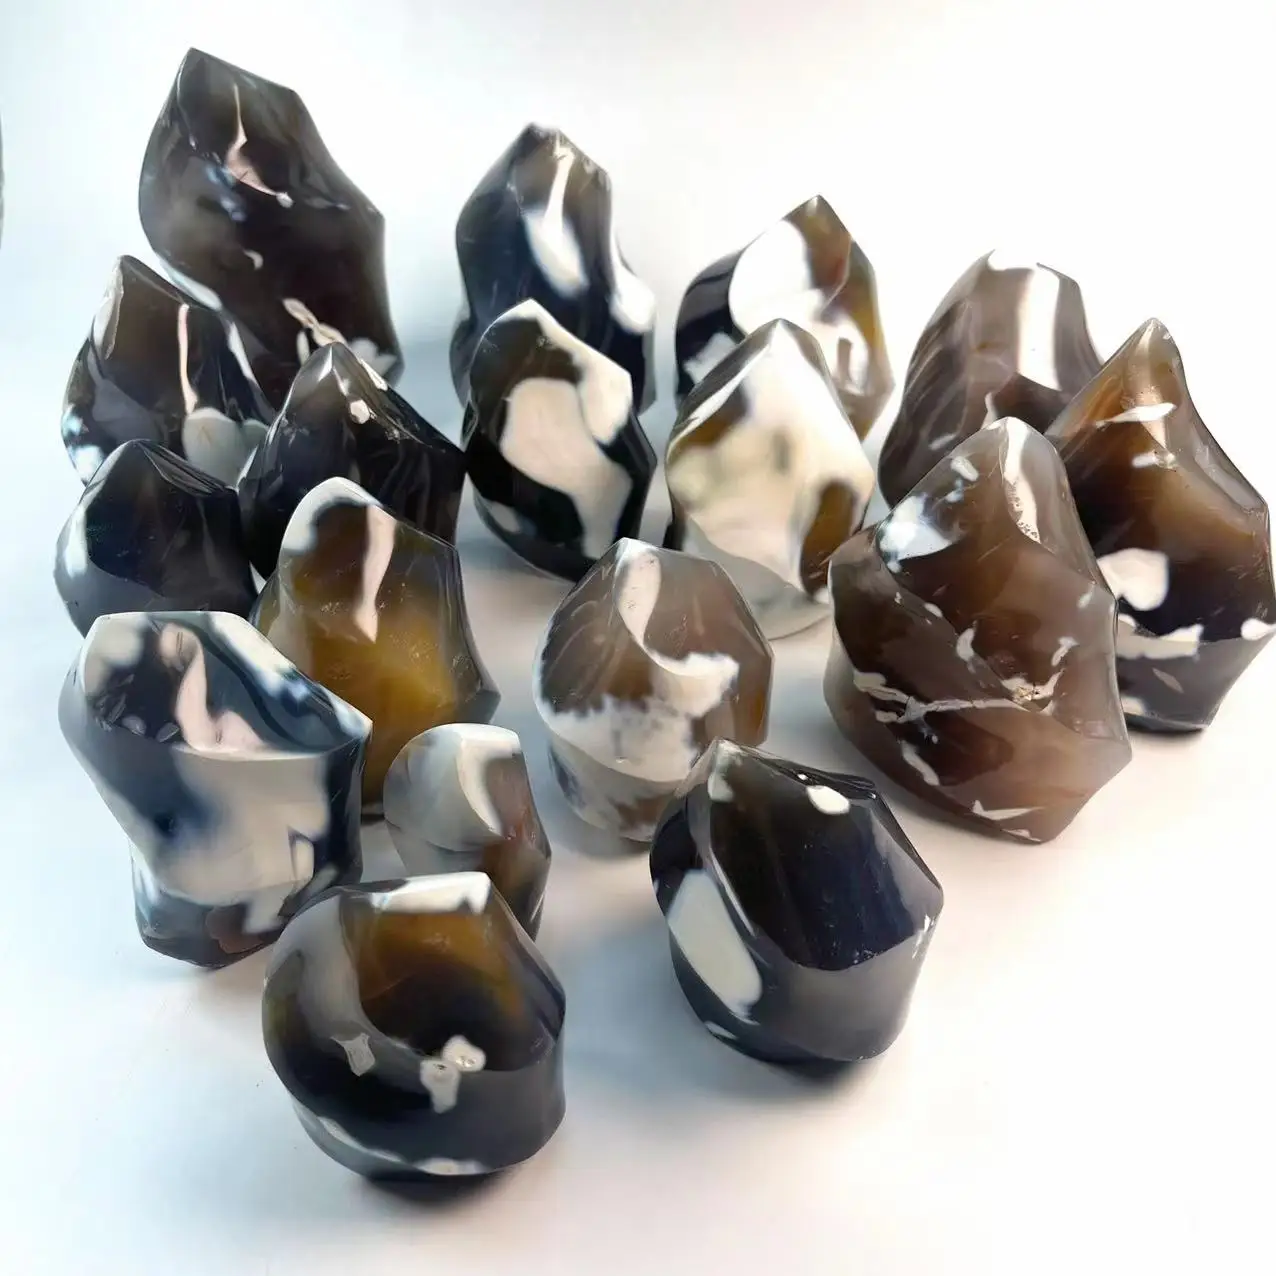 

High Quality Natural Gemstone Hand Carved Orca Agate Flame Crystal Craft For Healing Or Decoration.